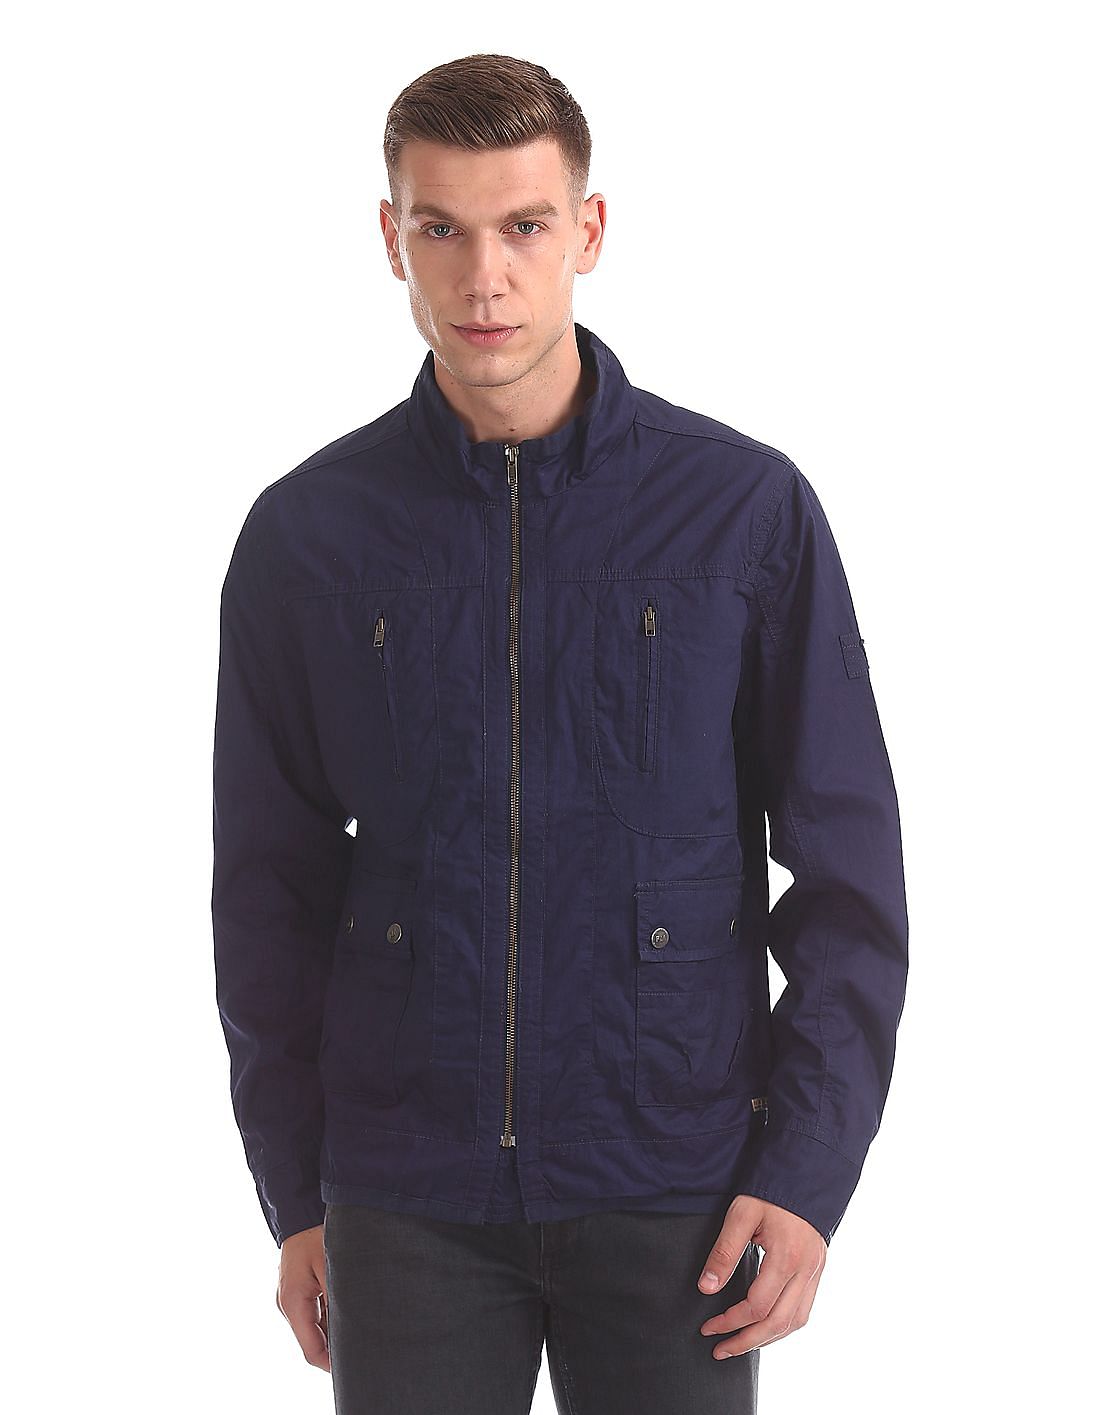 Buy Men Stand Collar Utility Jacket online at NNNOW.com